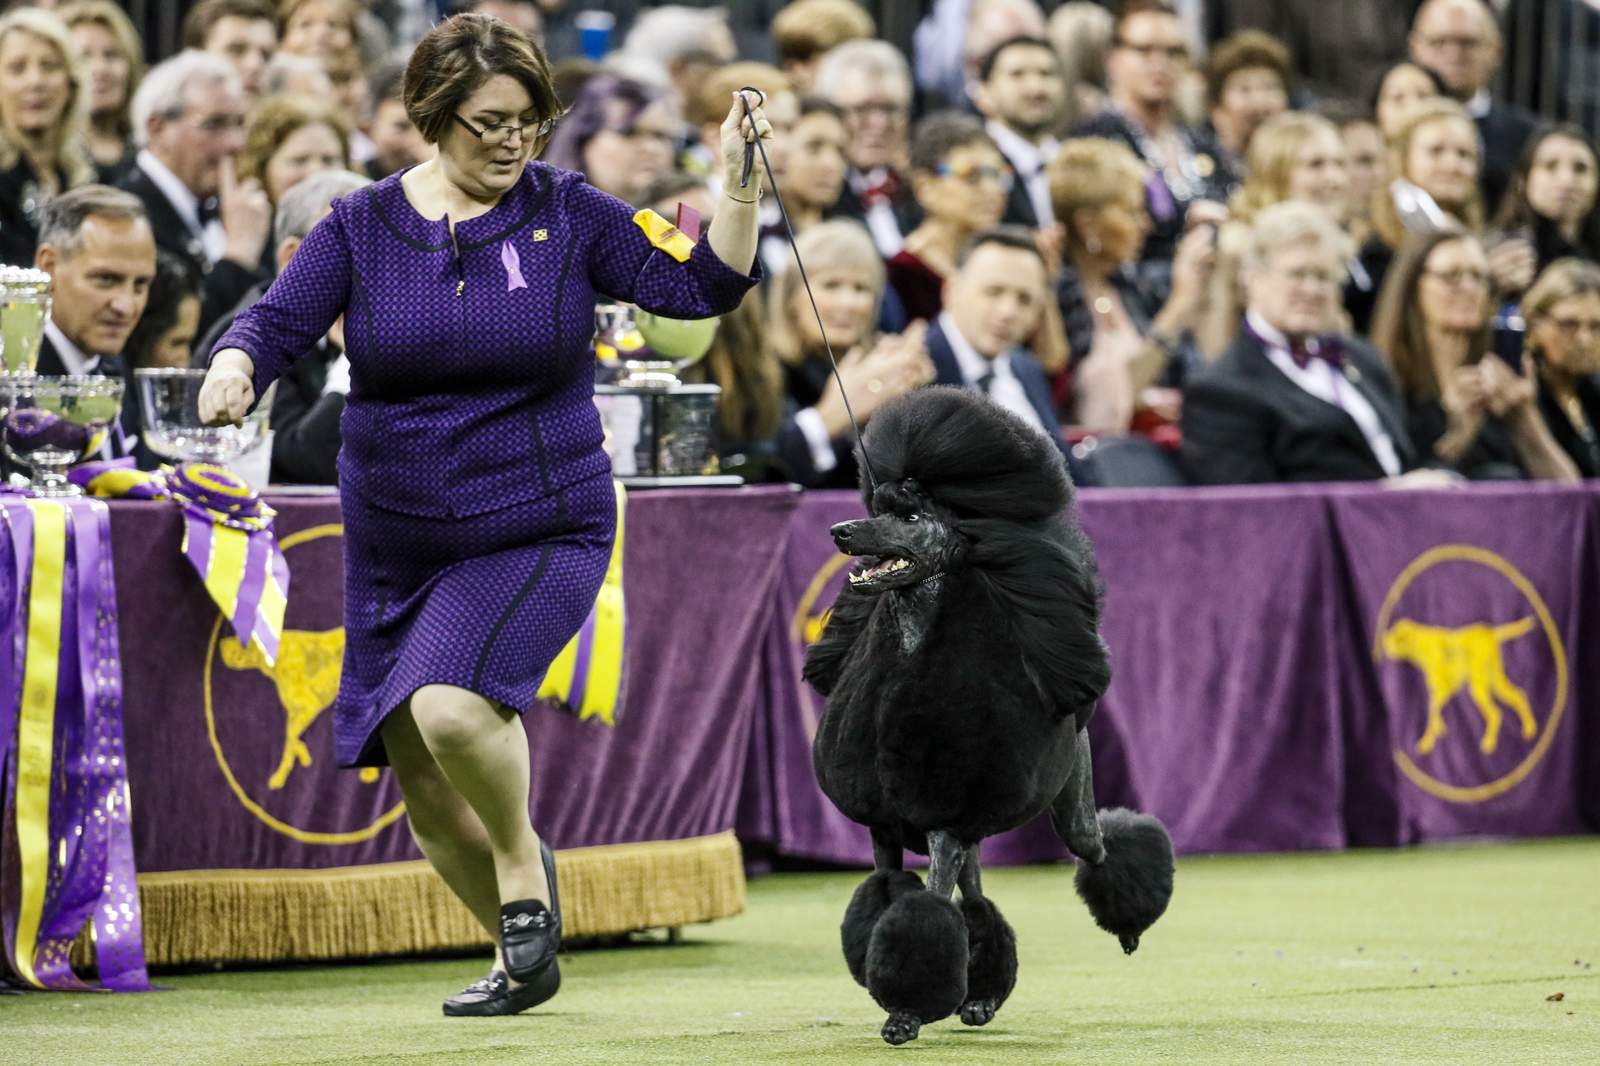 Westminster dog show won't have spectators due to virus